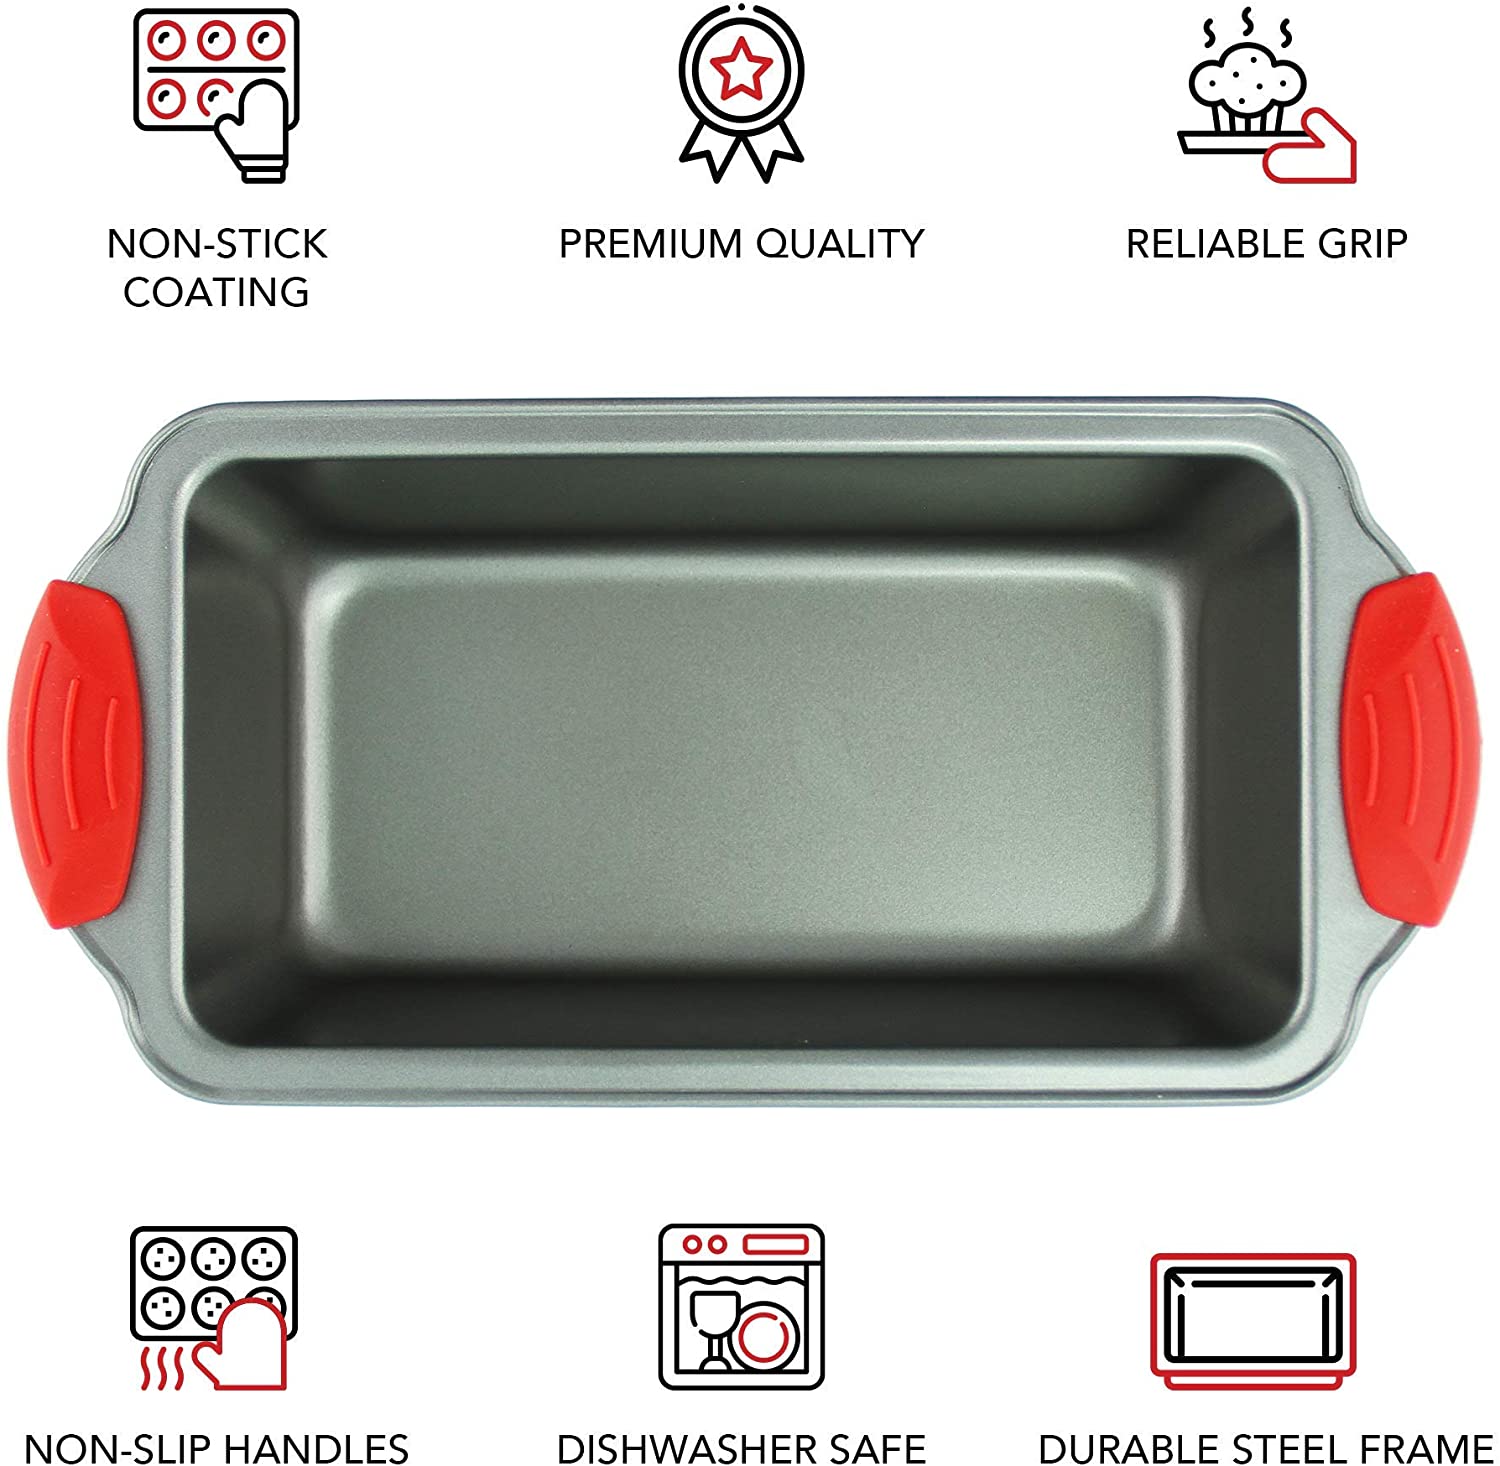 Meatloaf and Bread Pan | Gourmet Non-Stick Silicone Loaf Pan by Boxiki Kitchen | for Baking Banana Bread, Meat Loaf, Pound Cake | 8.5 FDA-Approved